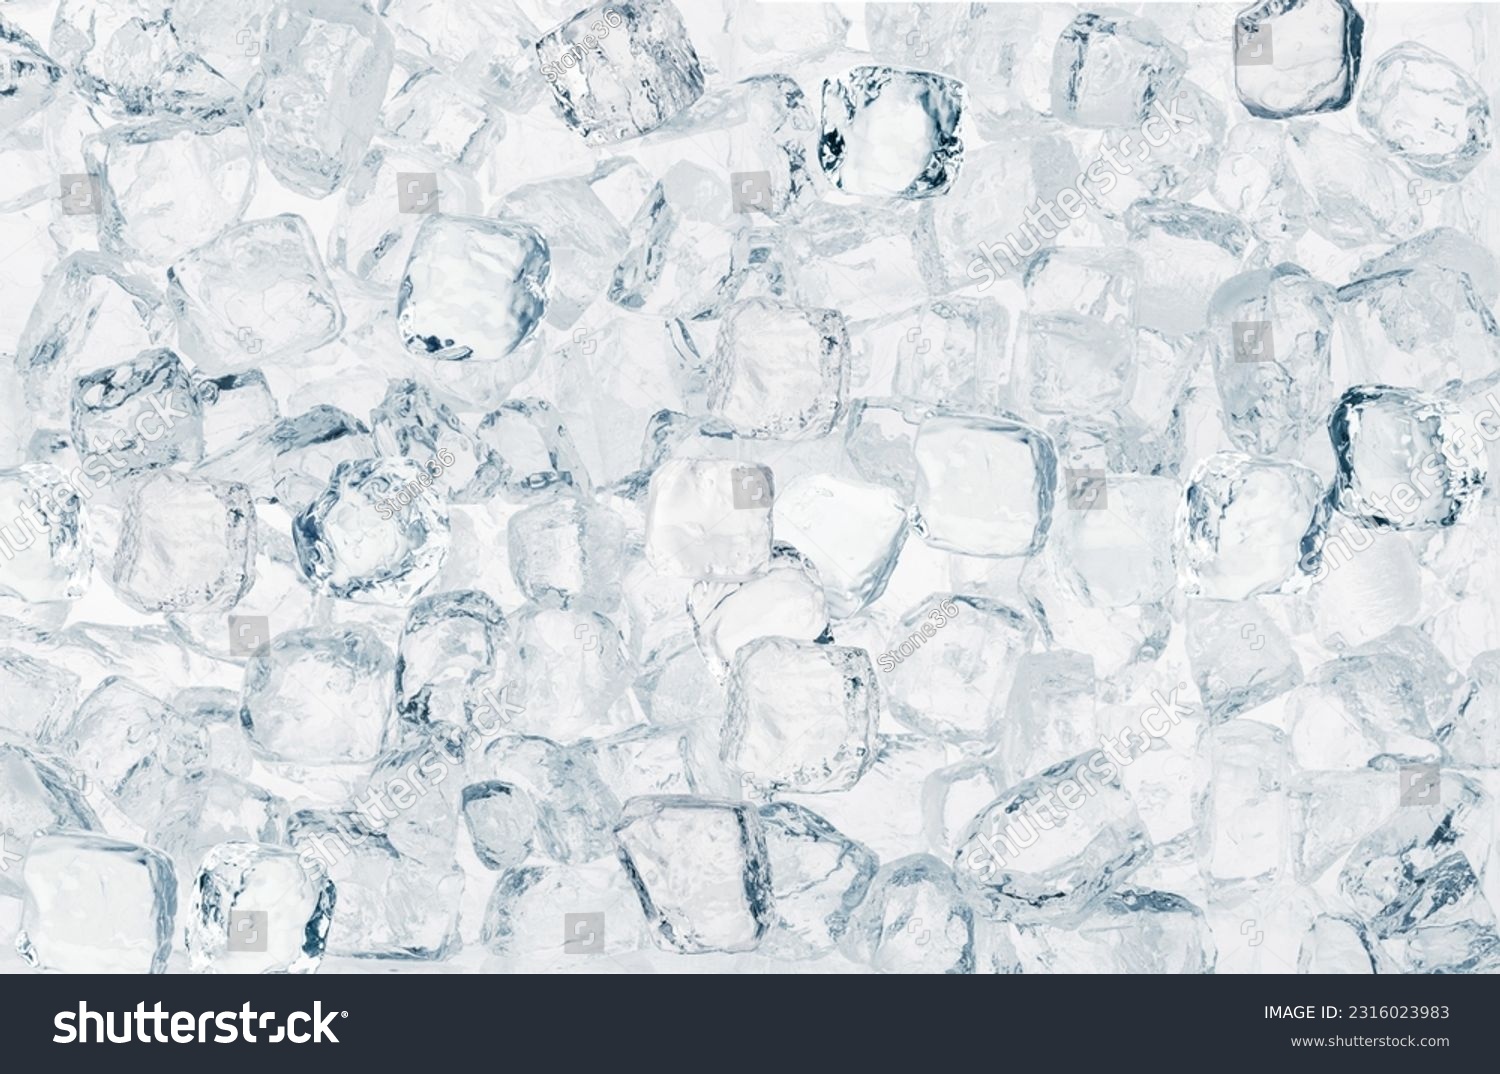 Tray with natural ice cubes on white background. #2316023983